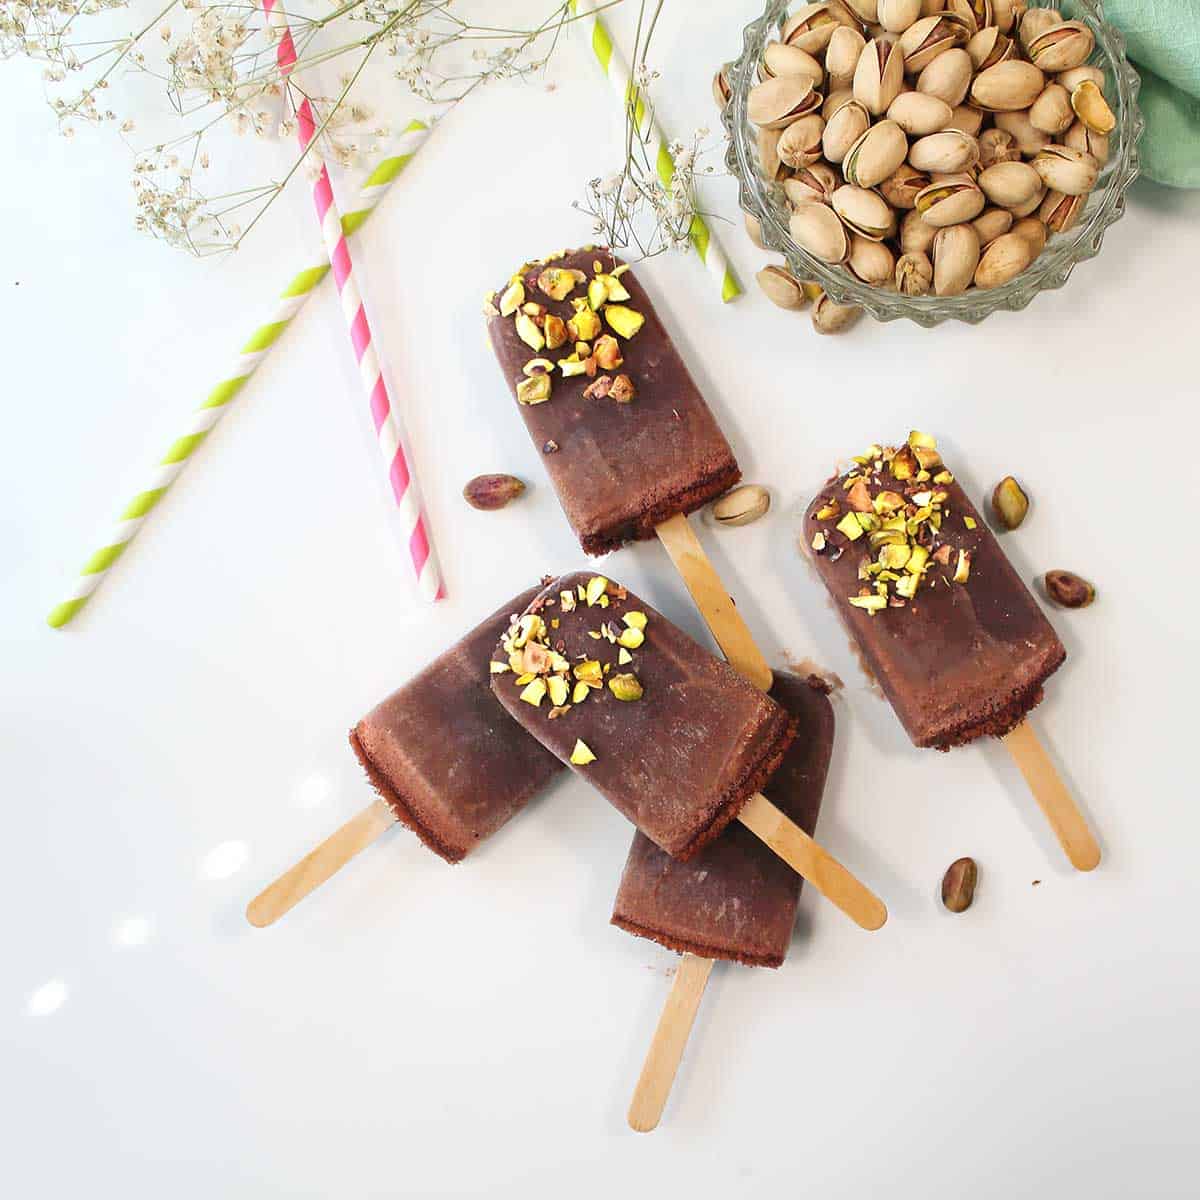 Scattered fudgesicles with nuts and colorful straws.